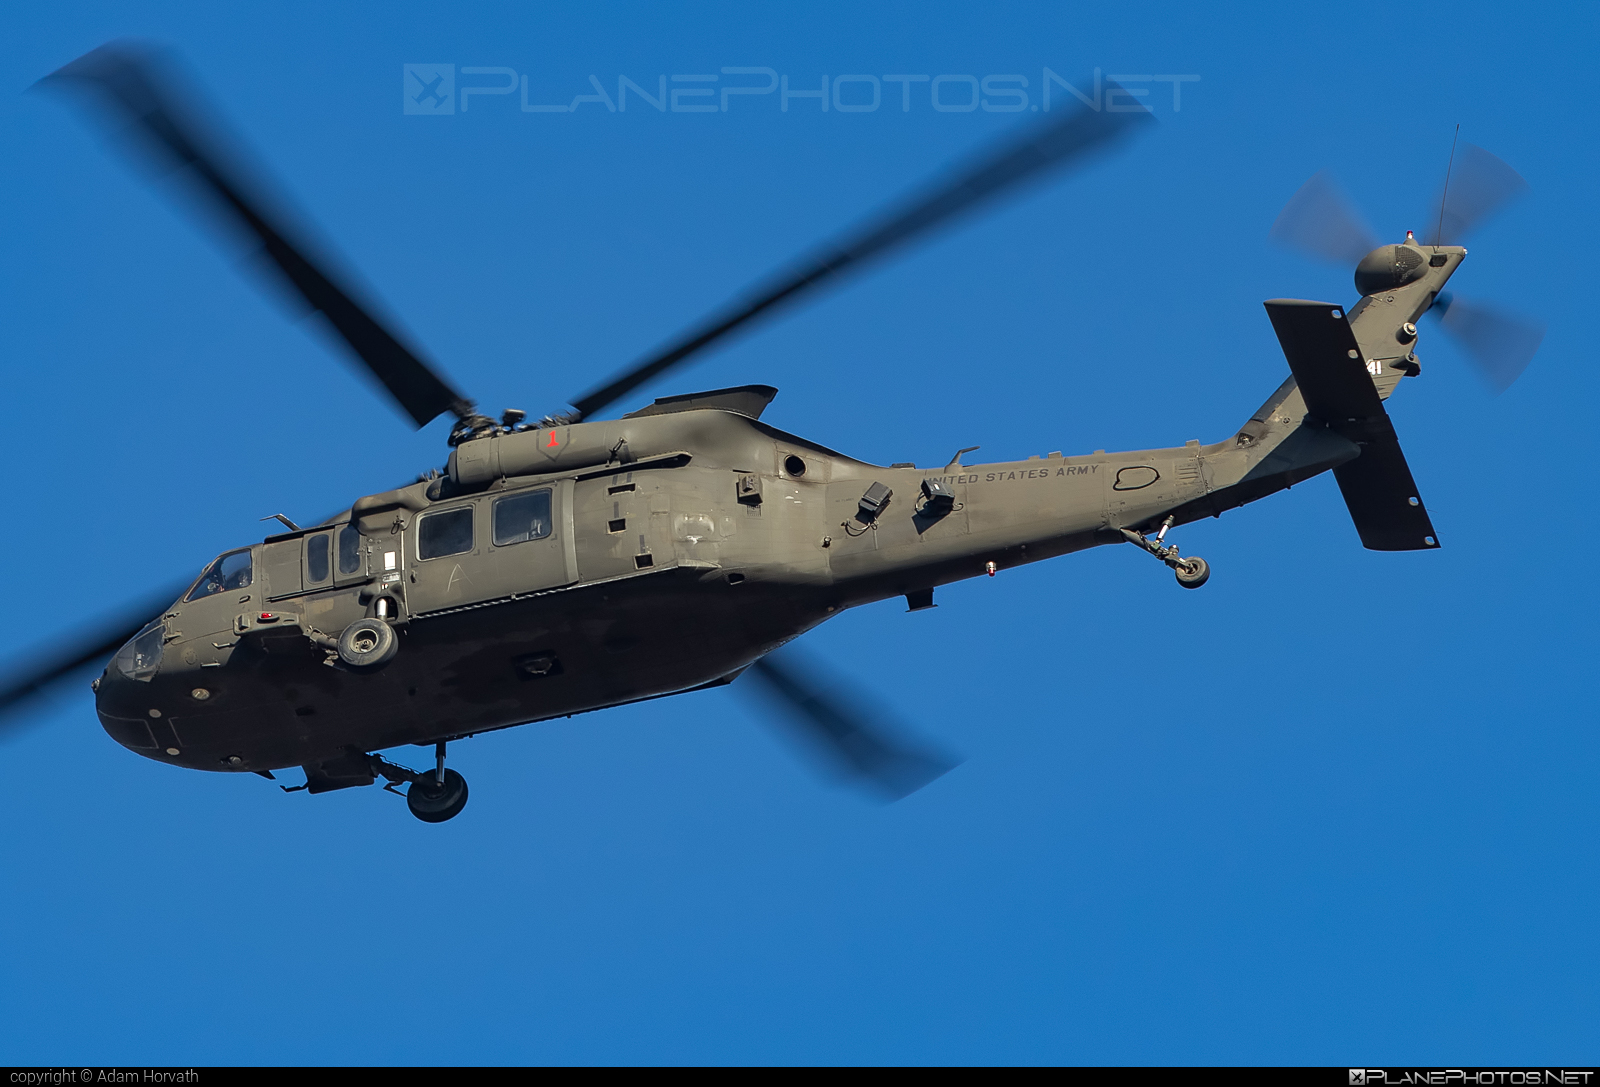 Sikorsky HH-60M Black Hawk - 10-20241 operated by US Army #blackhawk #hh60 #hh60blackhawk #hh60m #sikorsky #usarmy